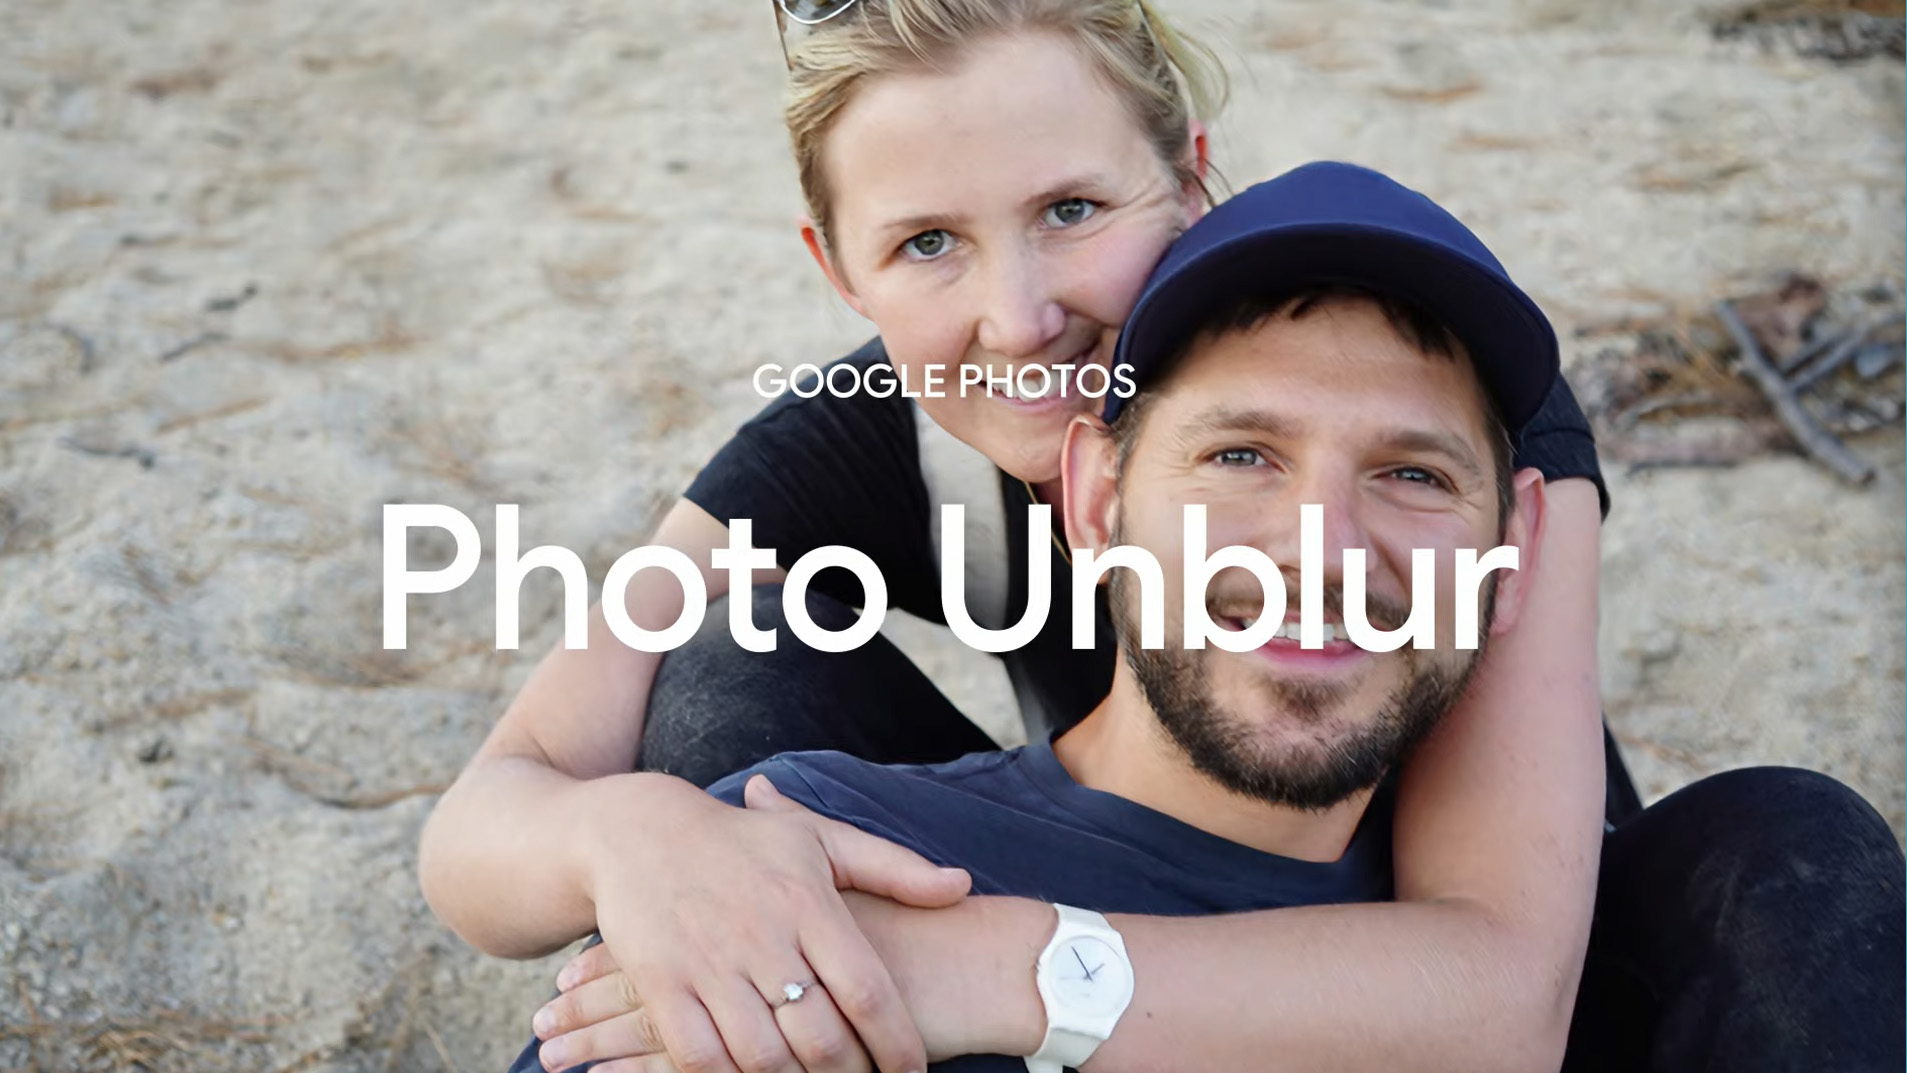 Photo Unblur at the Google Event Fall 2022